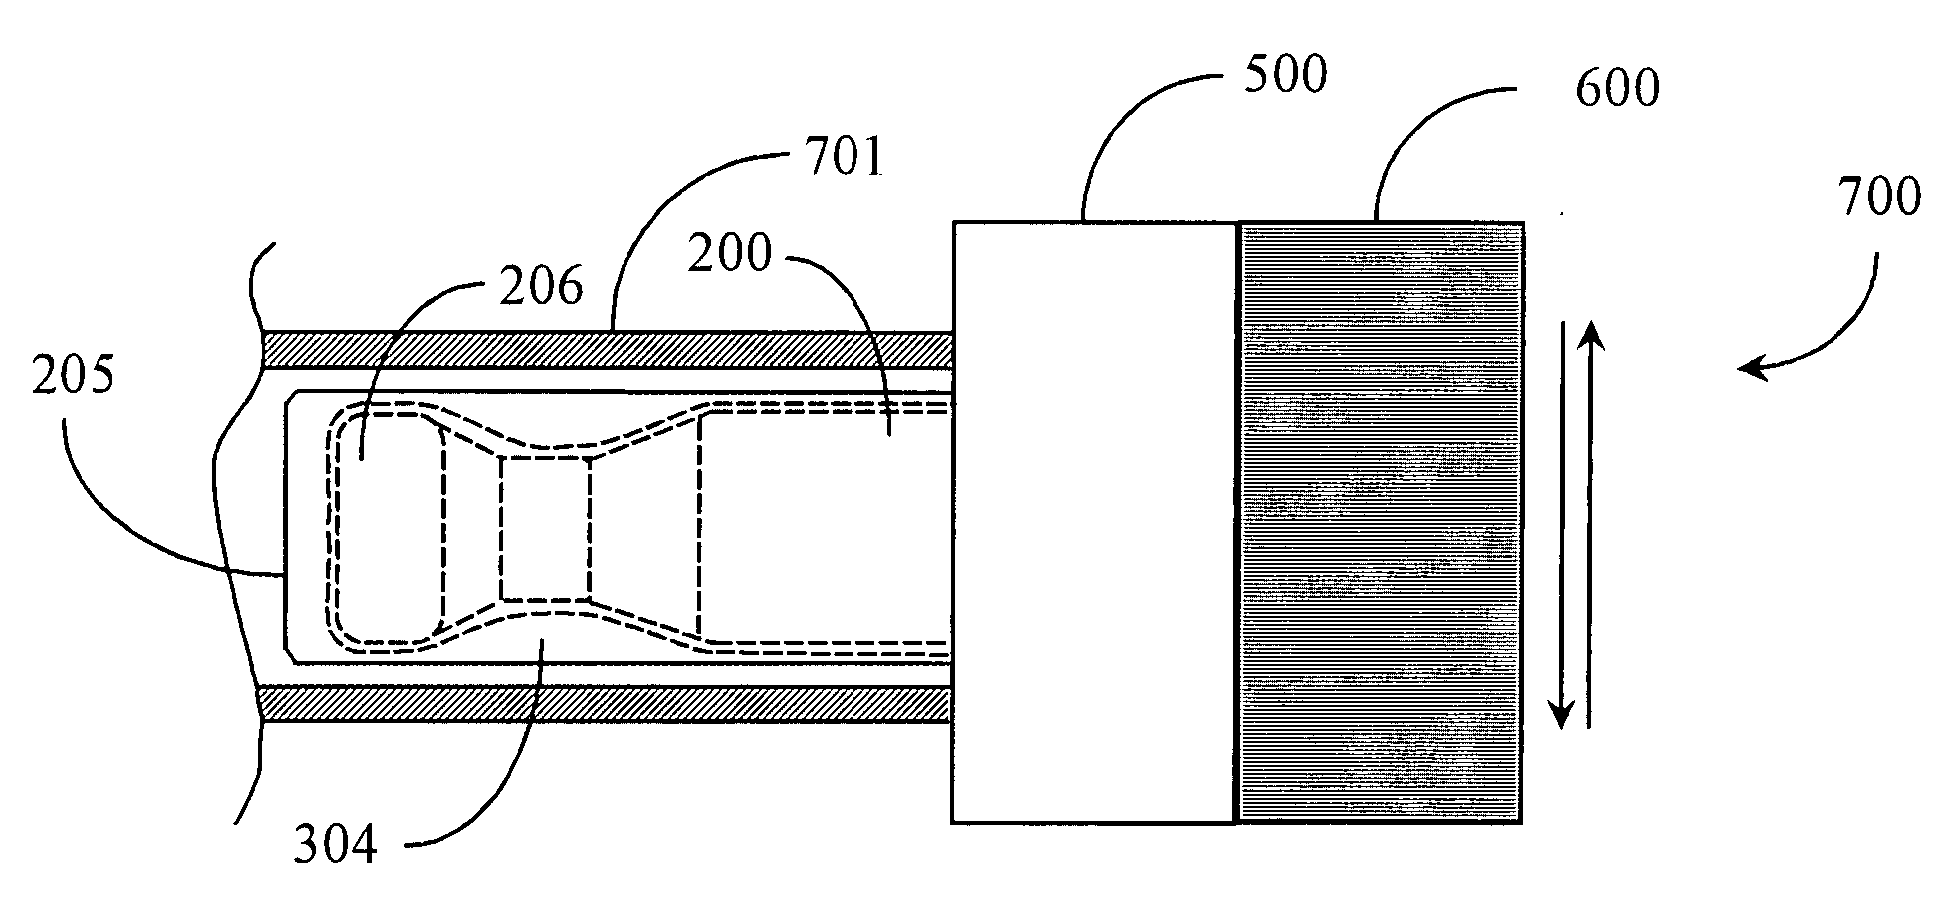 Method and apparatus for sealing and re-sealing an annular vessel opening